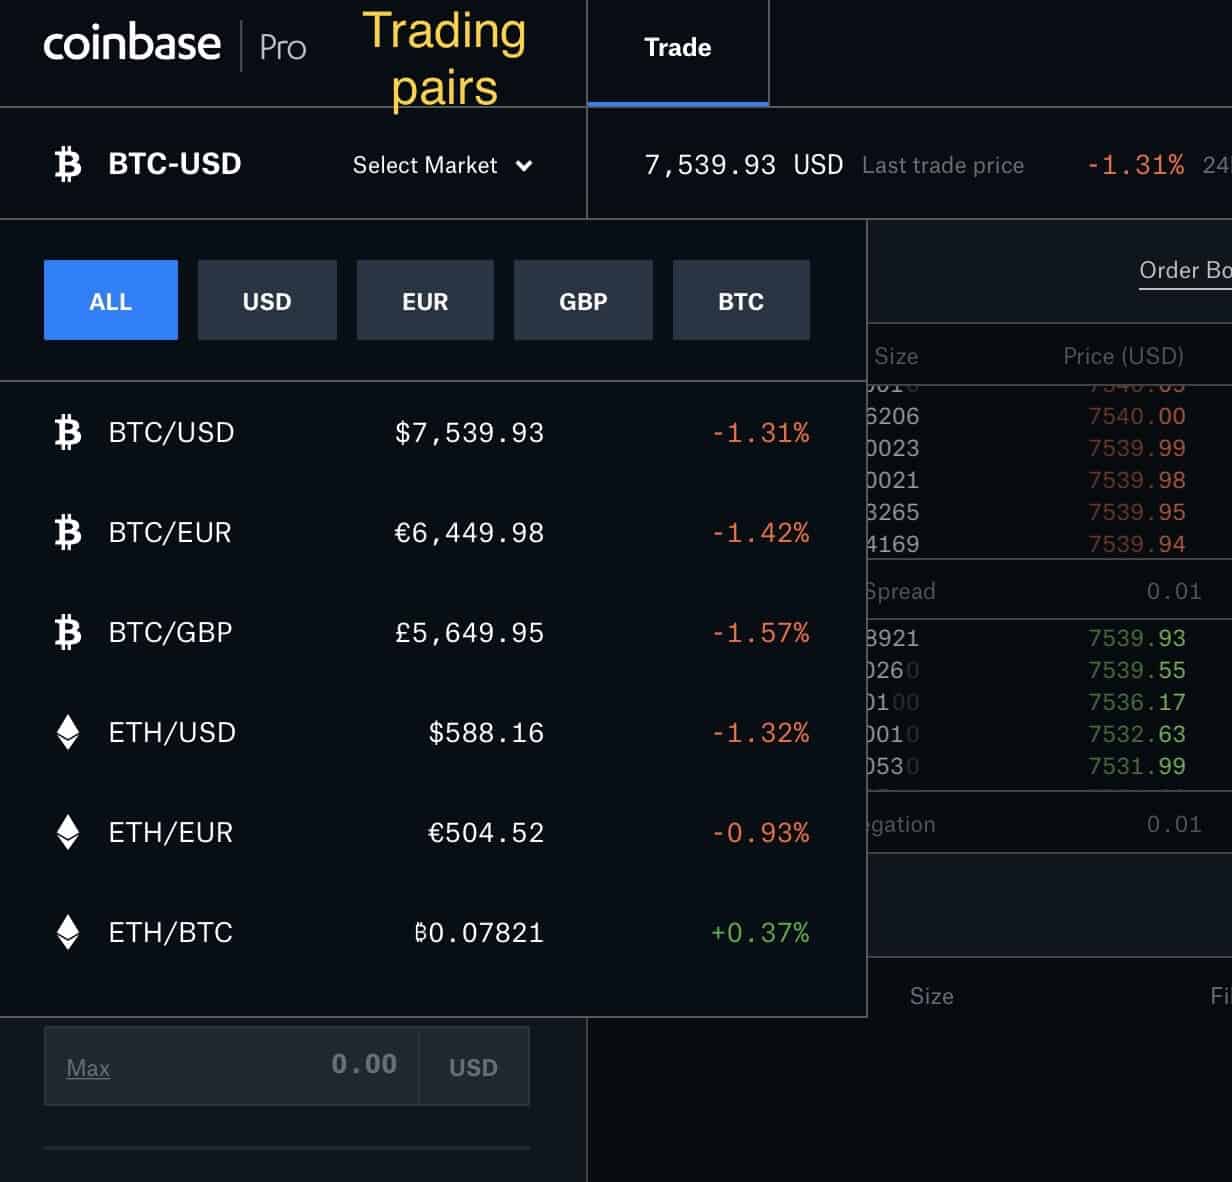 cheapest way to trade on coinbase